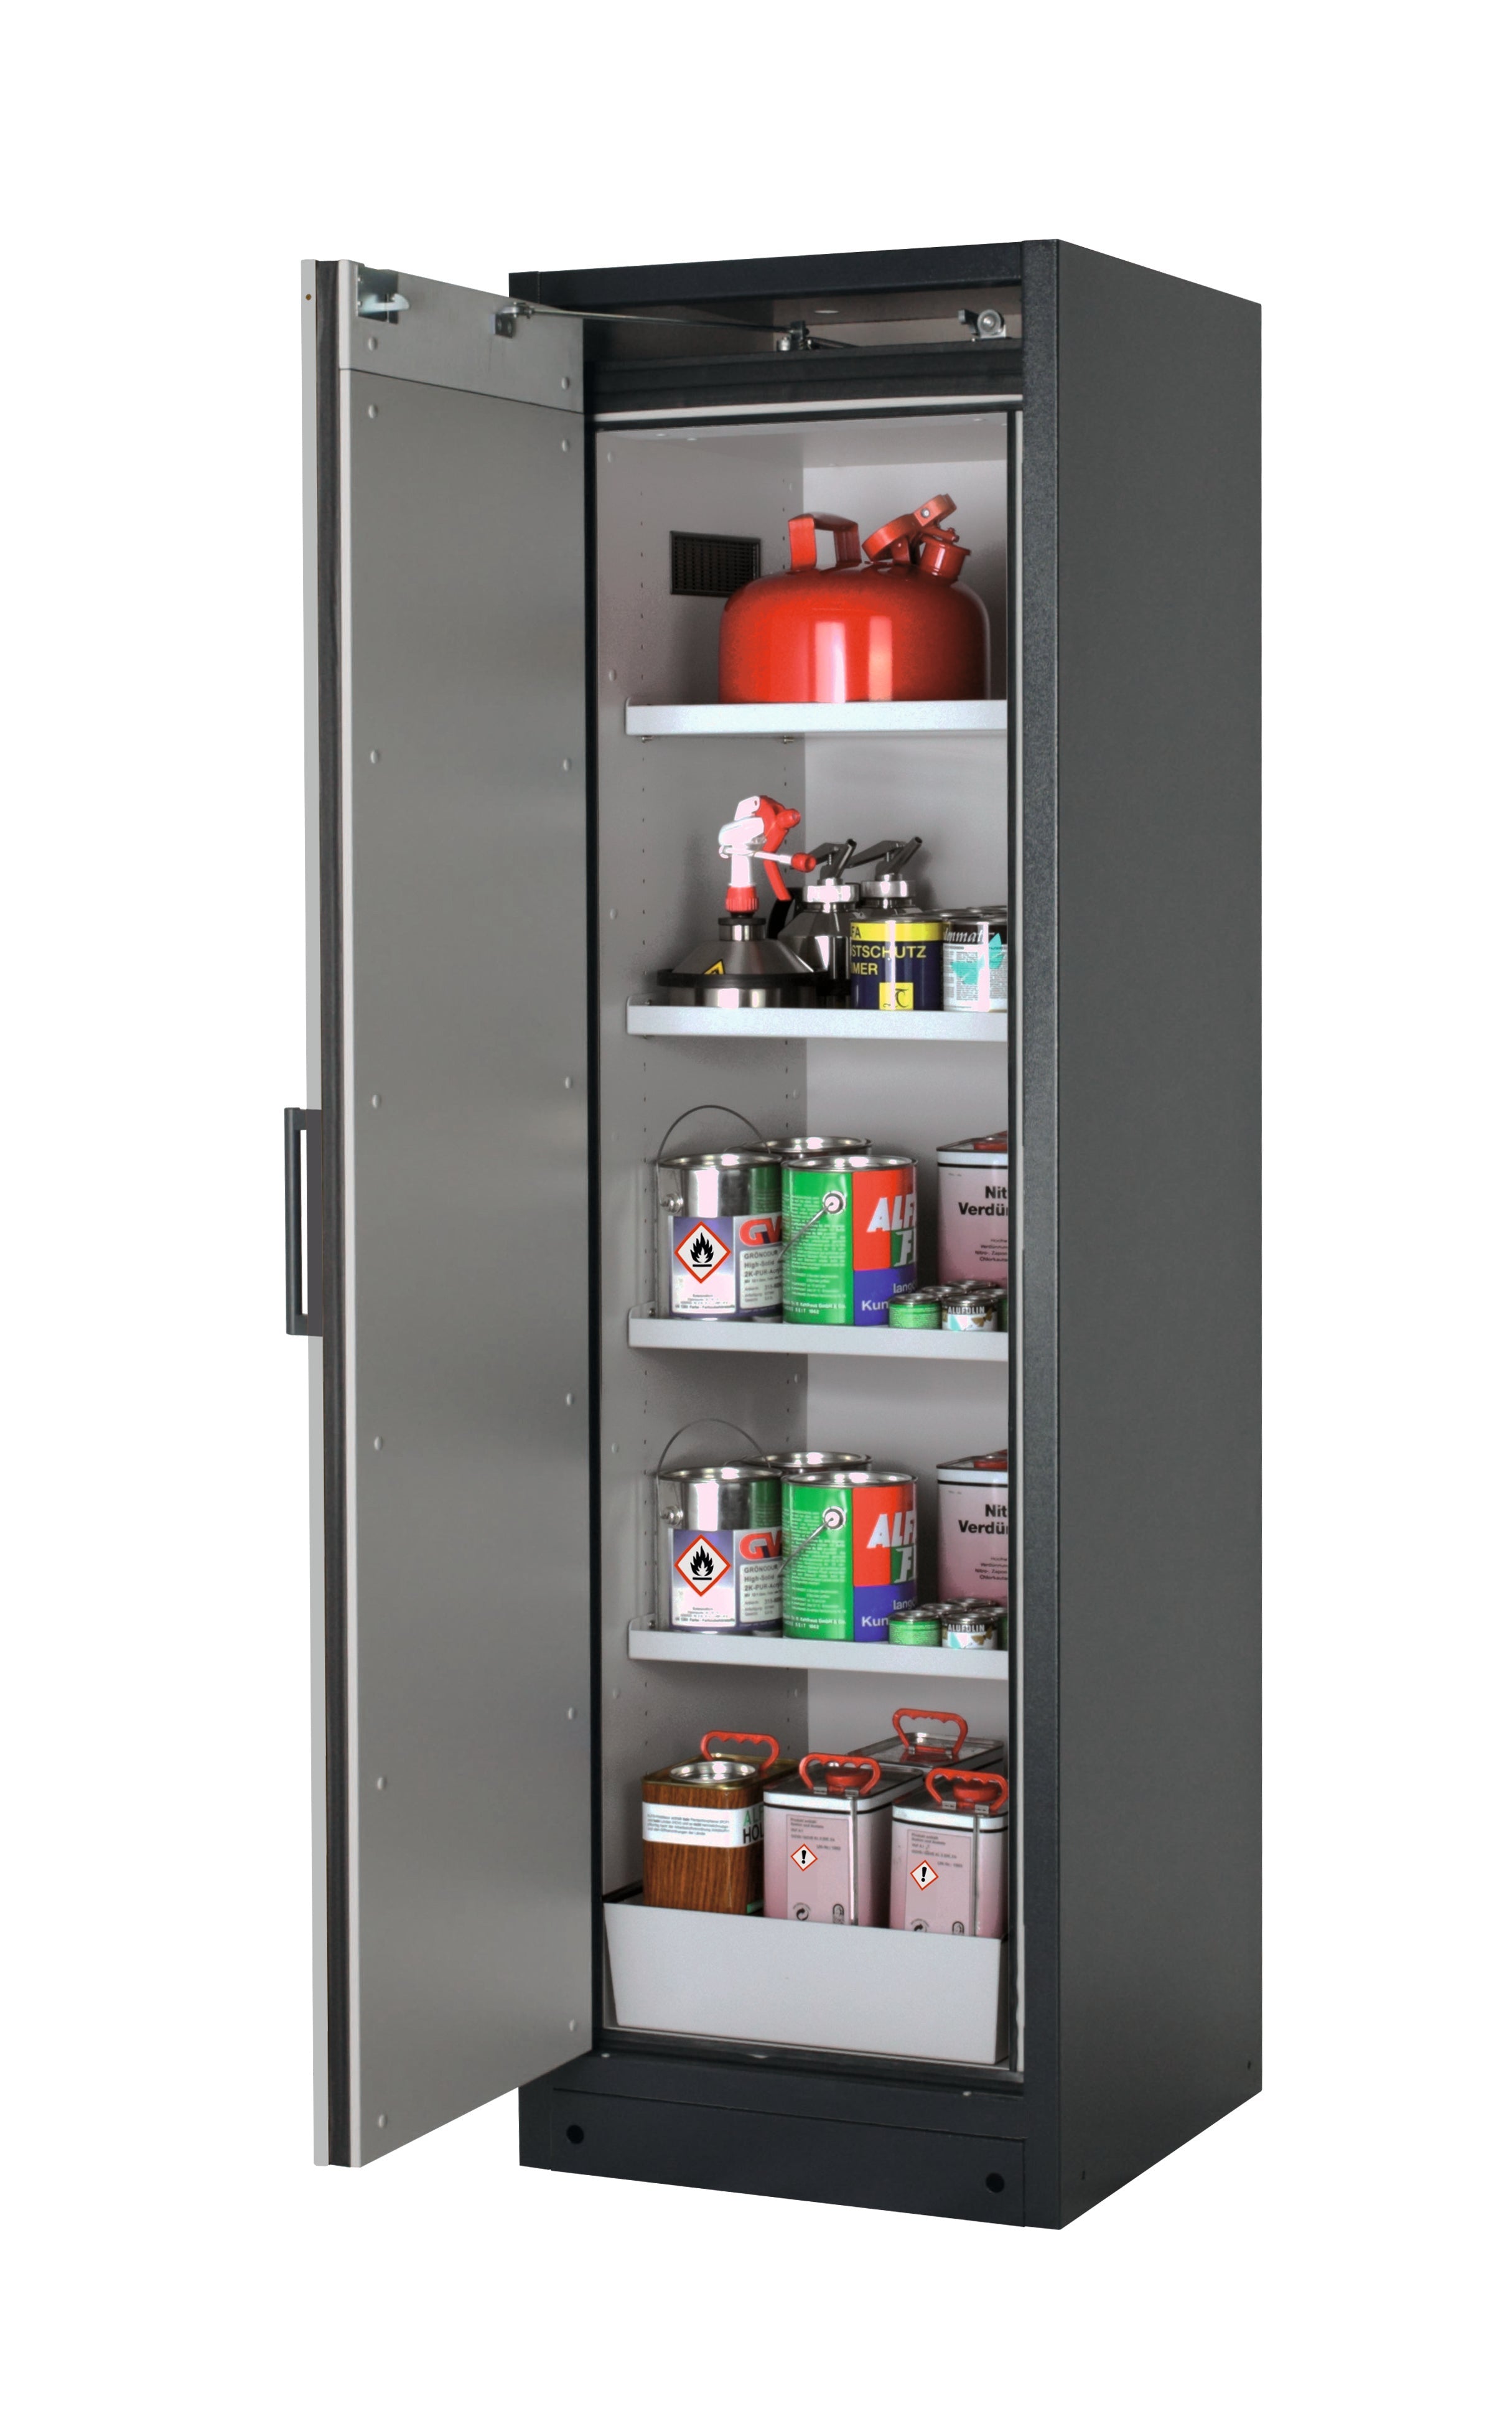 Type 90 safety storage cabinet Q-CLASSIC-90 model Q90.195.060 in pure white RAL 9010 with 4x shelf standard (sheet steel),